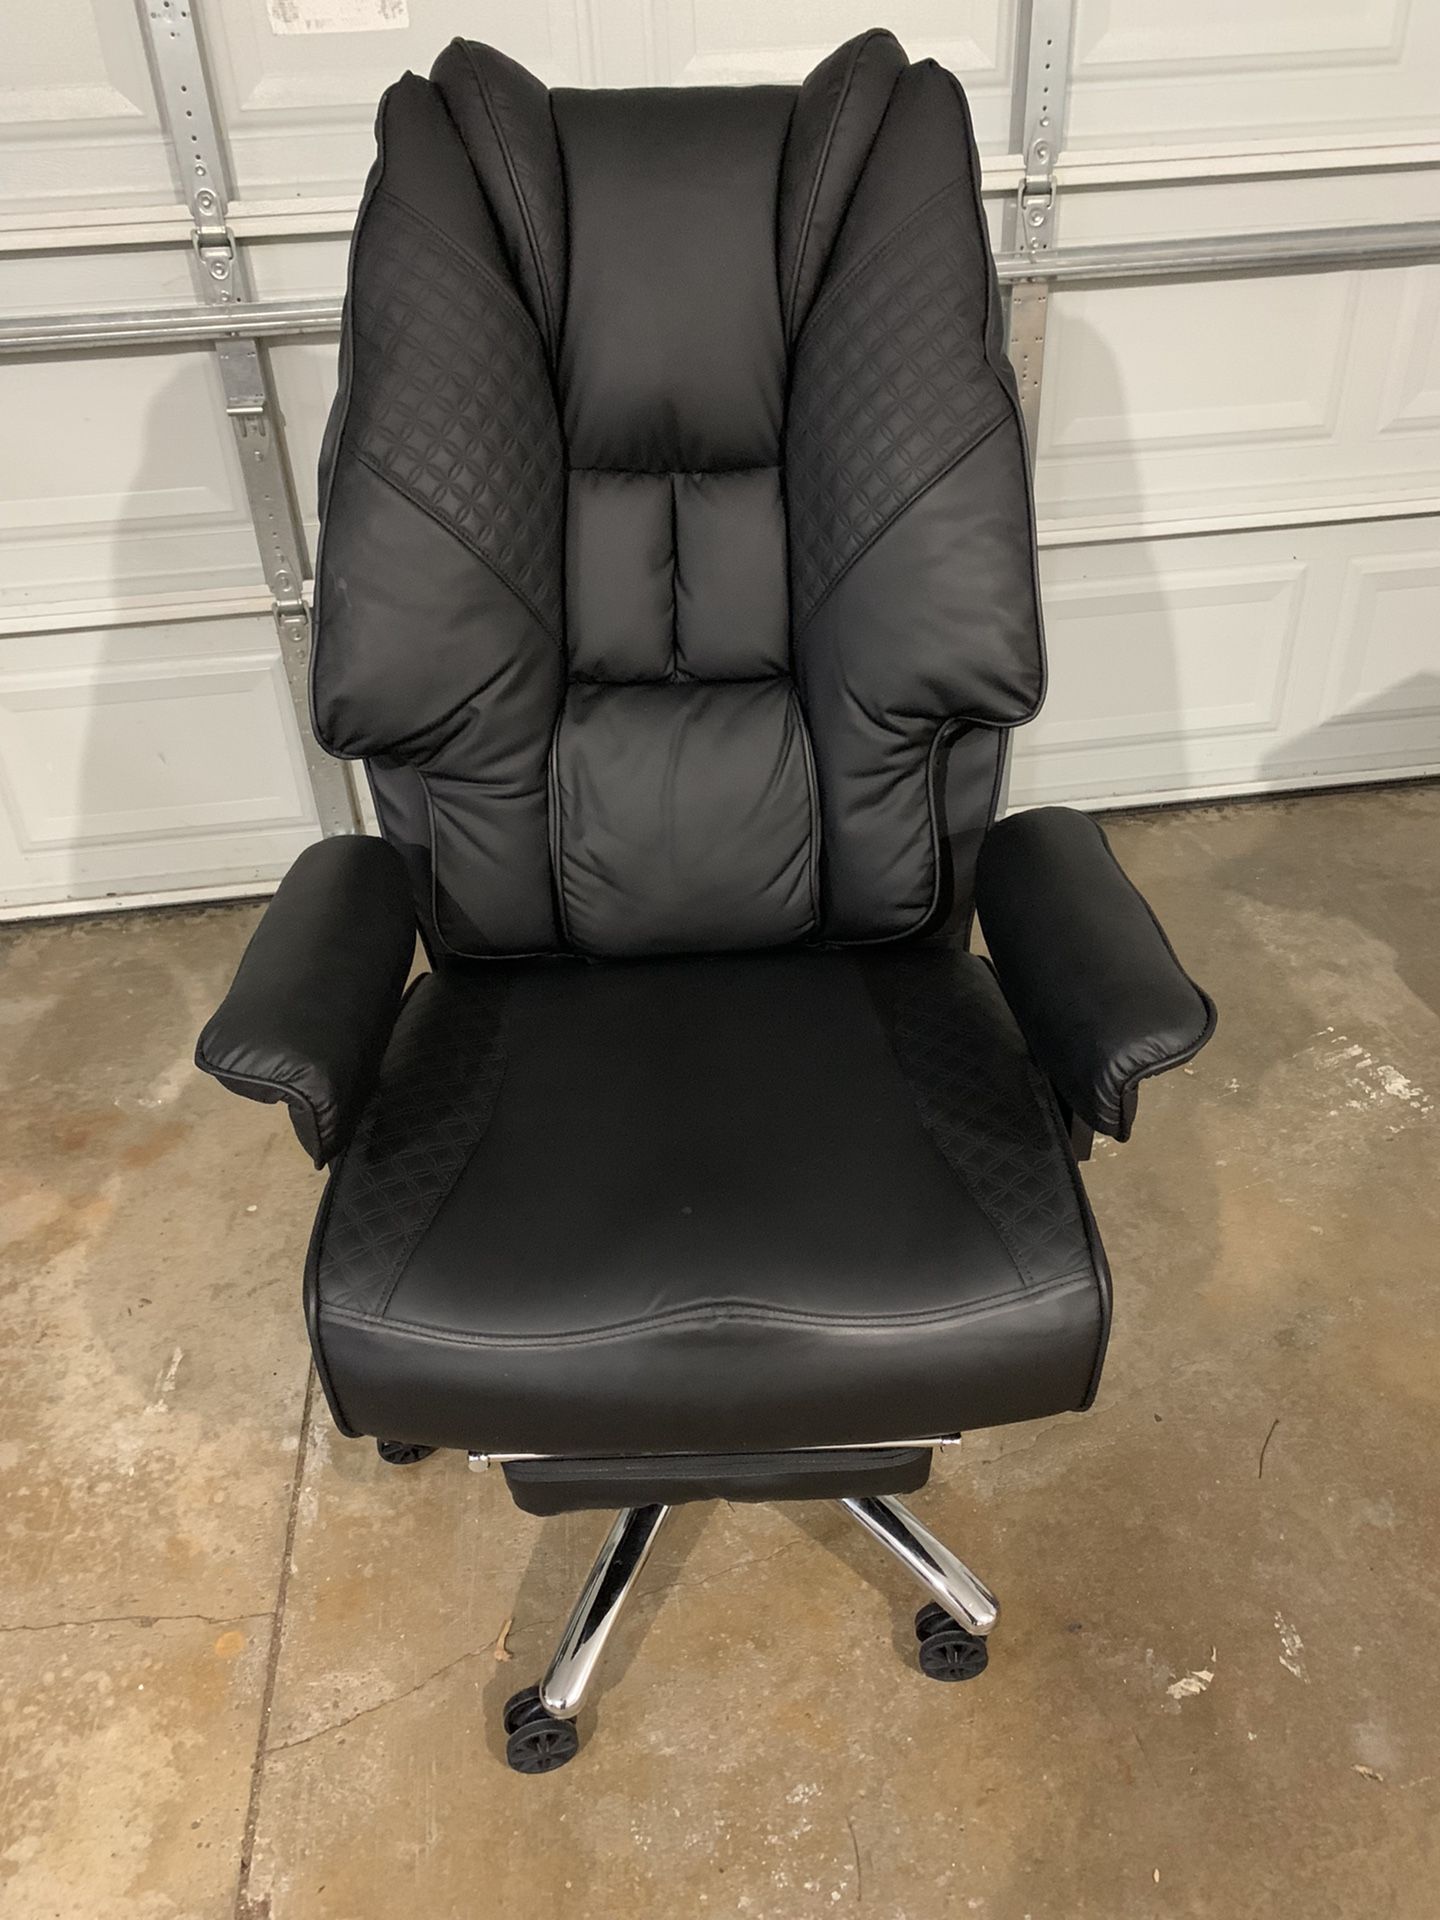 Excebet Big and Tall Office Chair With Footrest